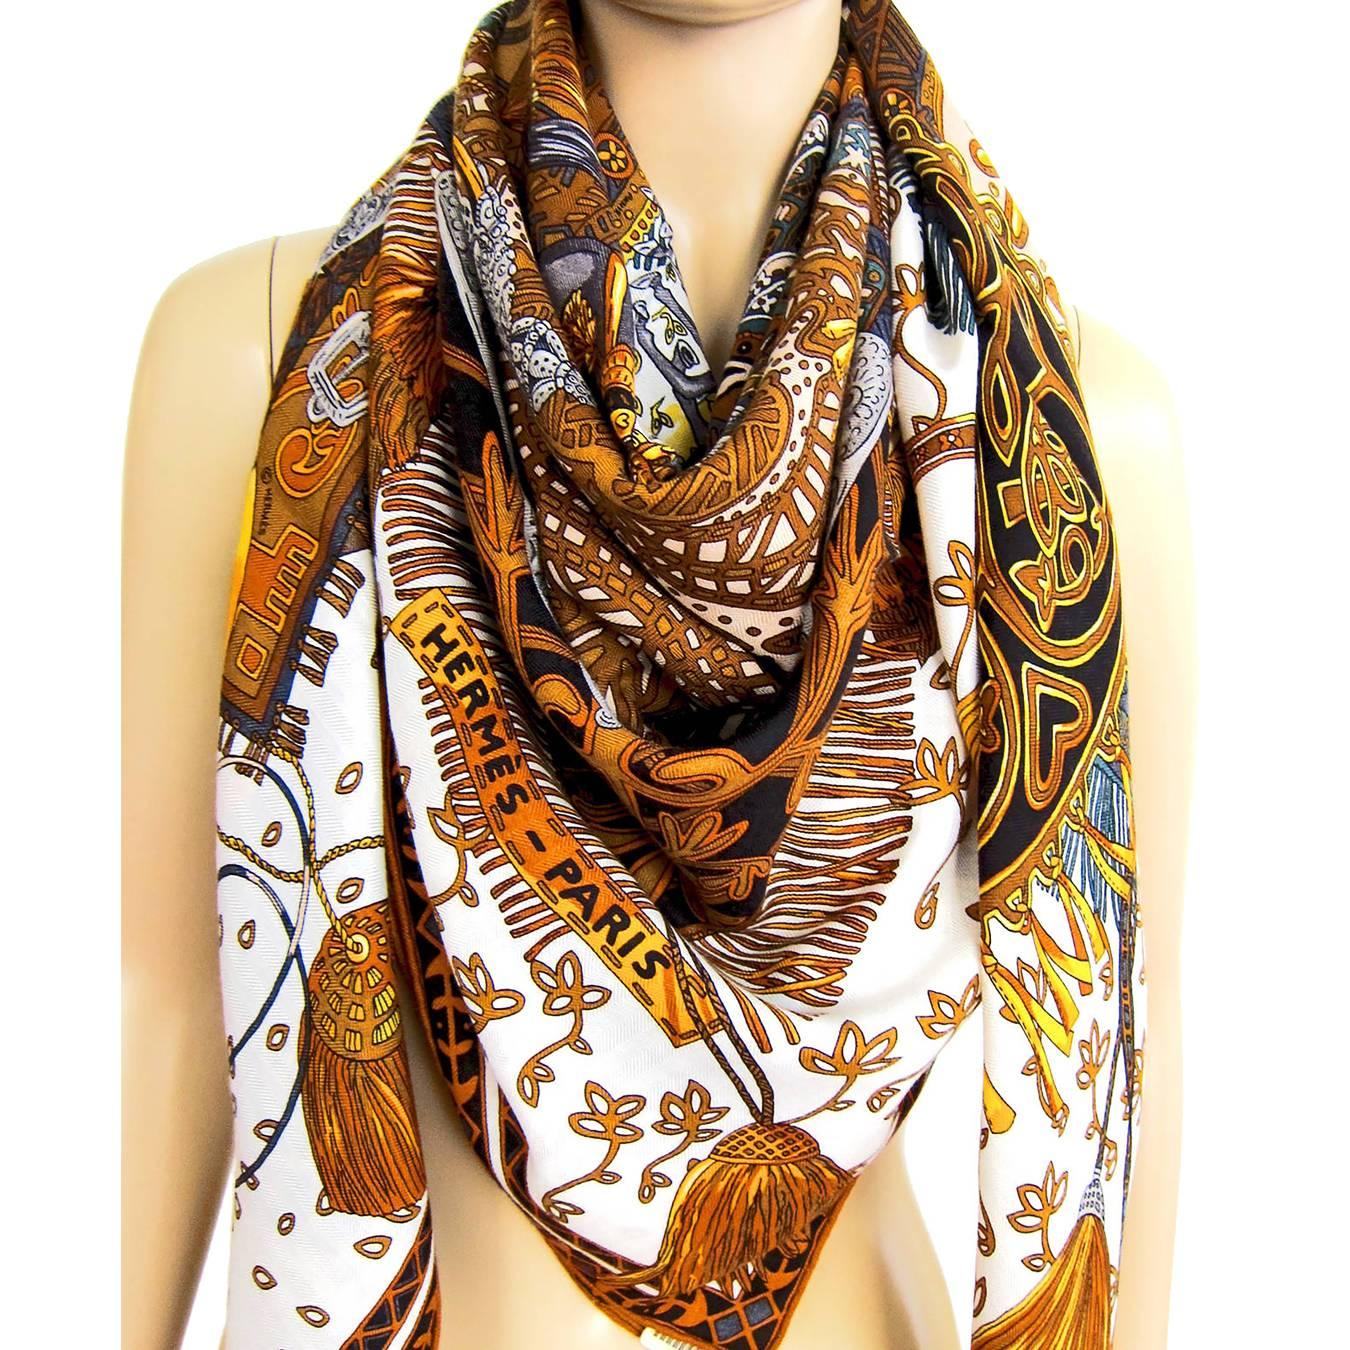 Hermes Cavaliers du Caucase Cashmere Silk Shawl Scarf GM 140cm New Classic Unisex

Hottest new Fall/Winter 2015 Cavaliers du Caucase Shawl 
Divine coloration in white, gold, and brown
Brand new classic shawl release for fall/winter
This